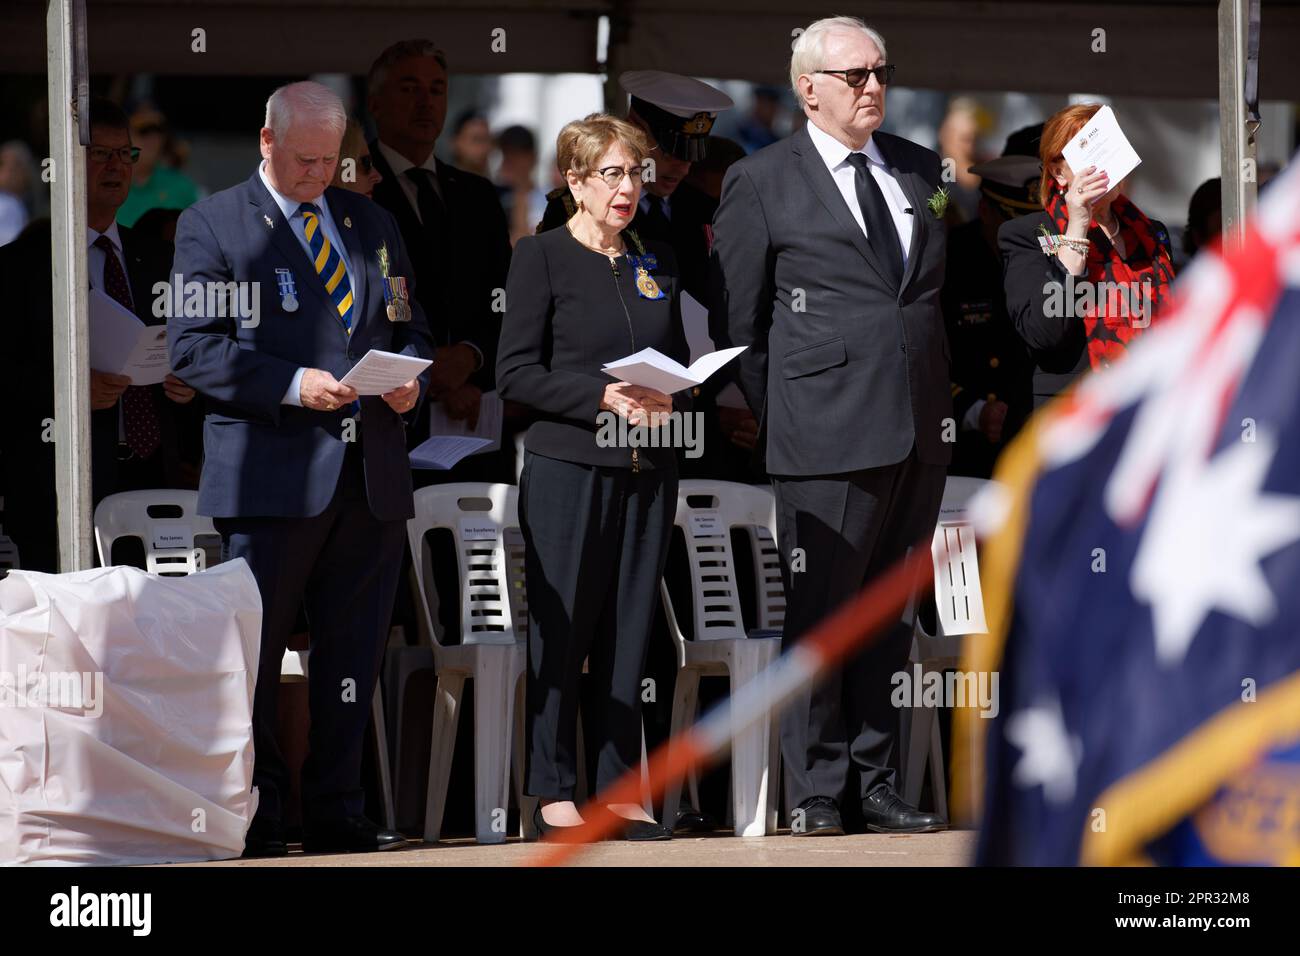 Sydney, Australia. 25th Apr, 2023. Ray James RSL NSW President, Margaret Beazley Governor of NSW and Dennis Wilson seen during the ANZAC Day Commemoration Service at the Anzac Memorial, Hyde Park South on April 25, 2023 in Sydney, Australia Credit: IOIO IMAGES/Alamy Live News Stock Photo